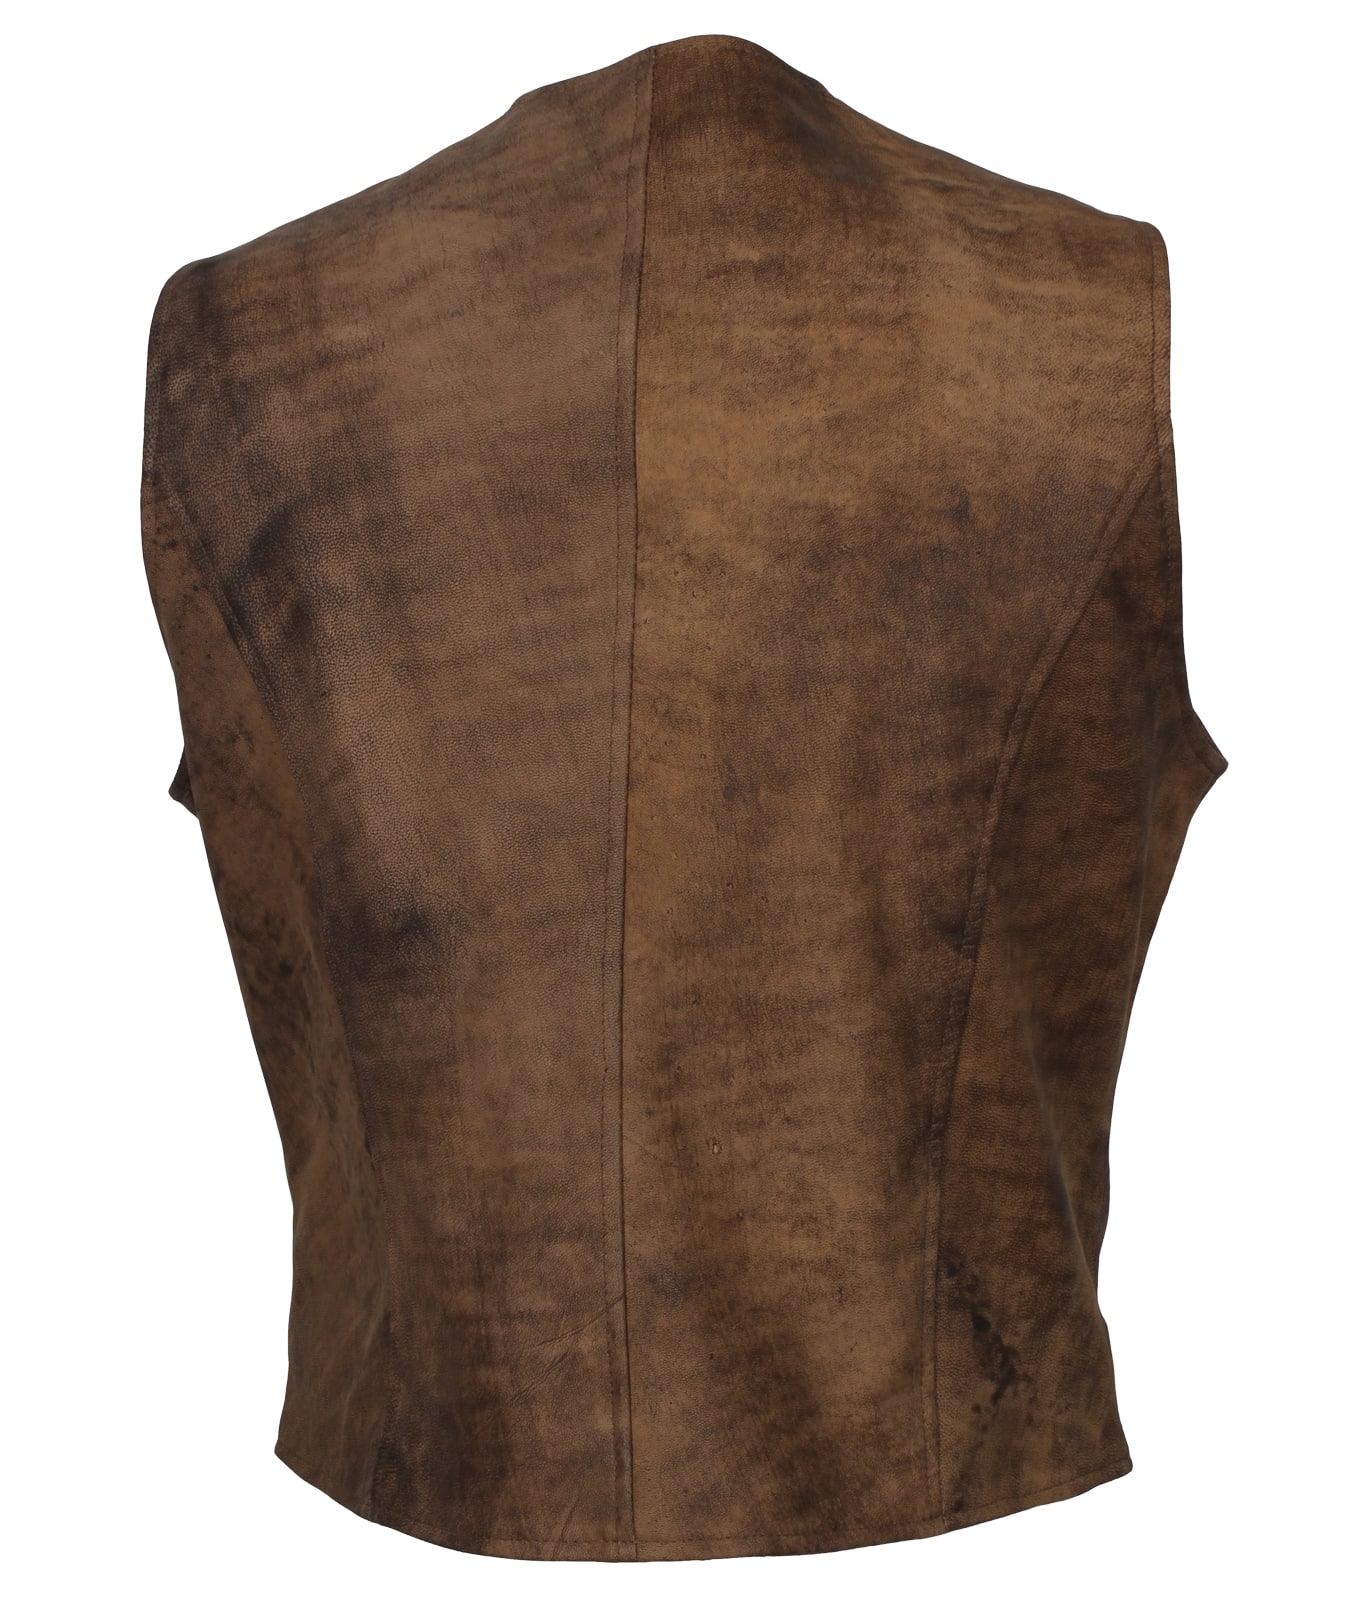 Men’s Distressed Brown Biker Leather Vest Sale USA Free Shipping